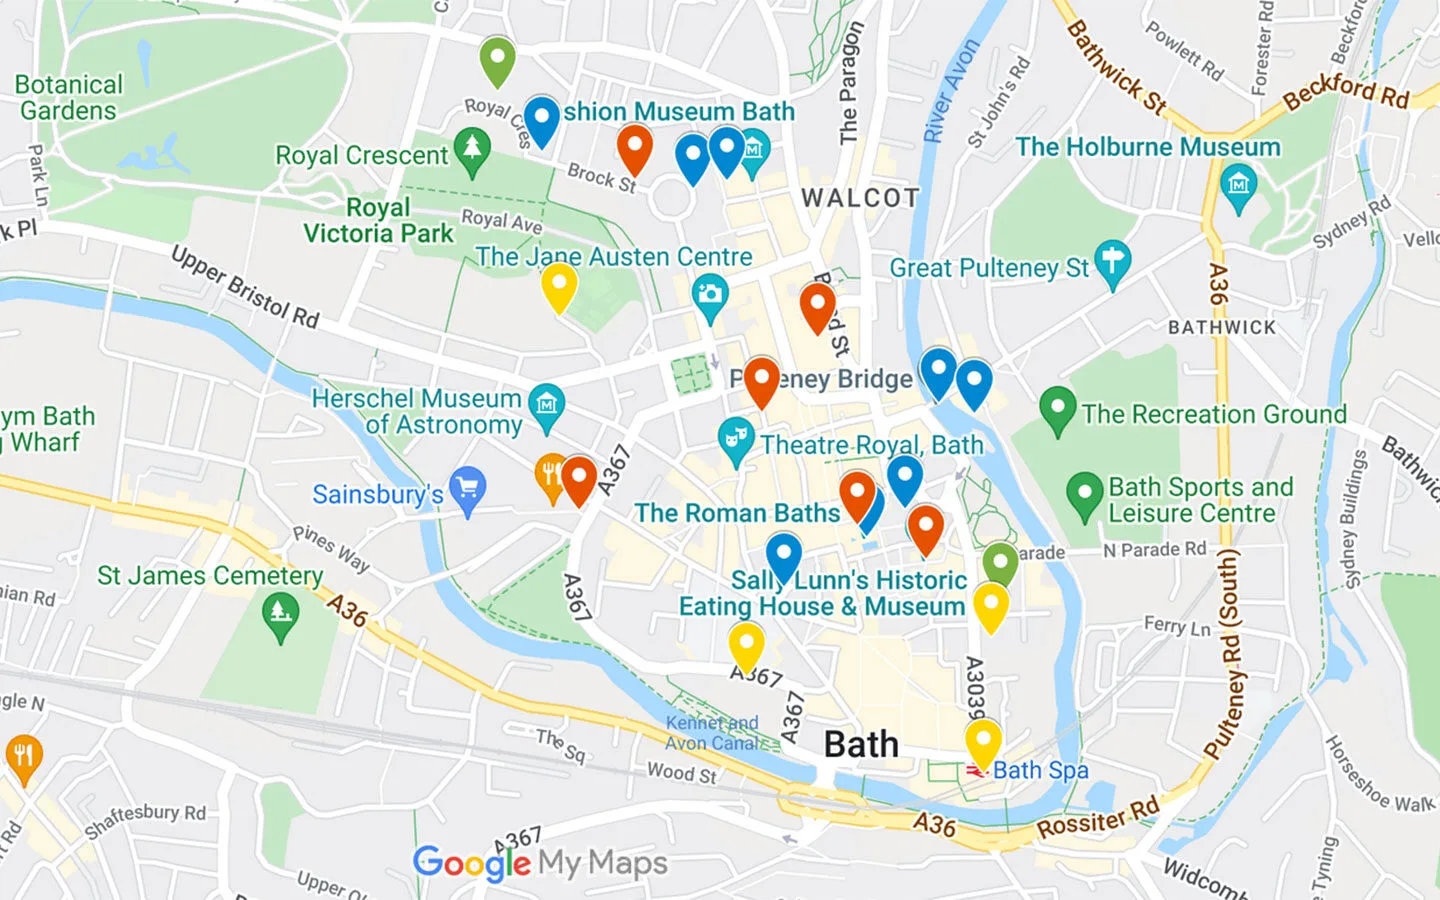 Map of things to do on a weekend in Bath